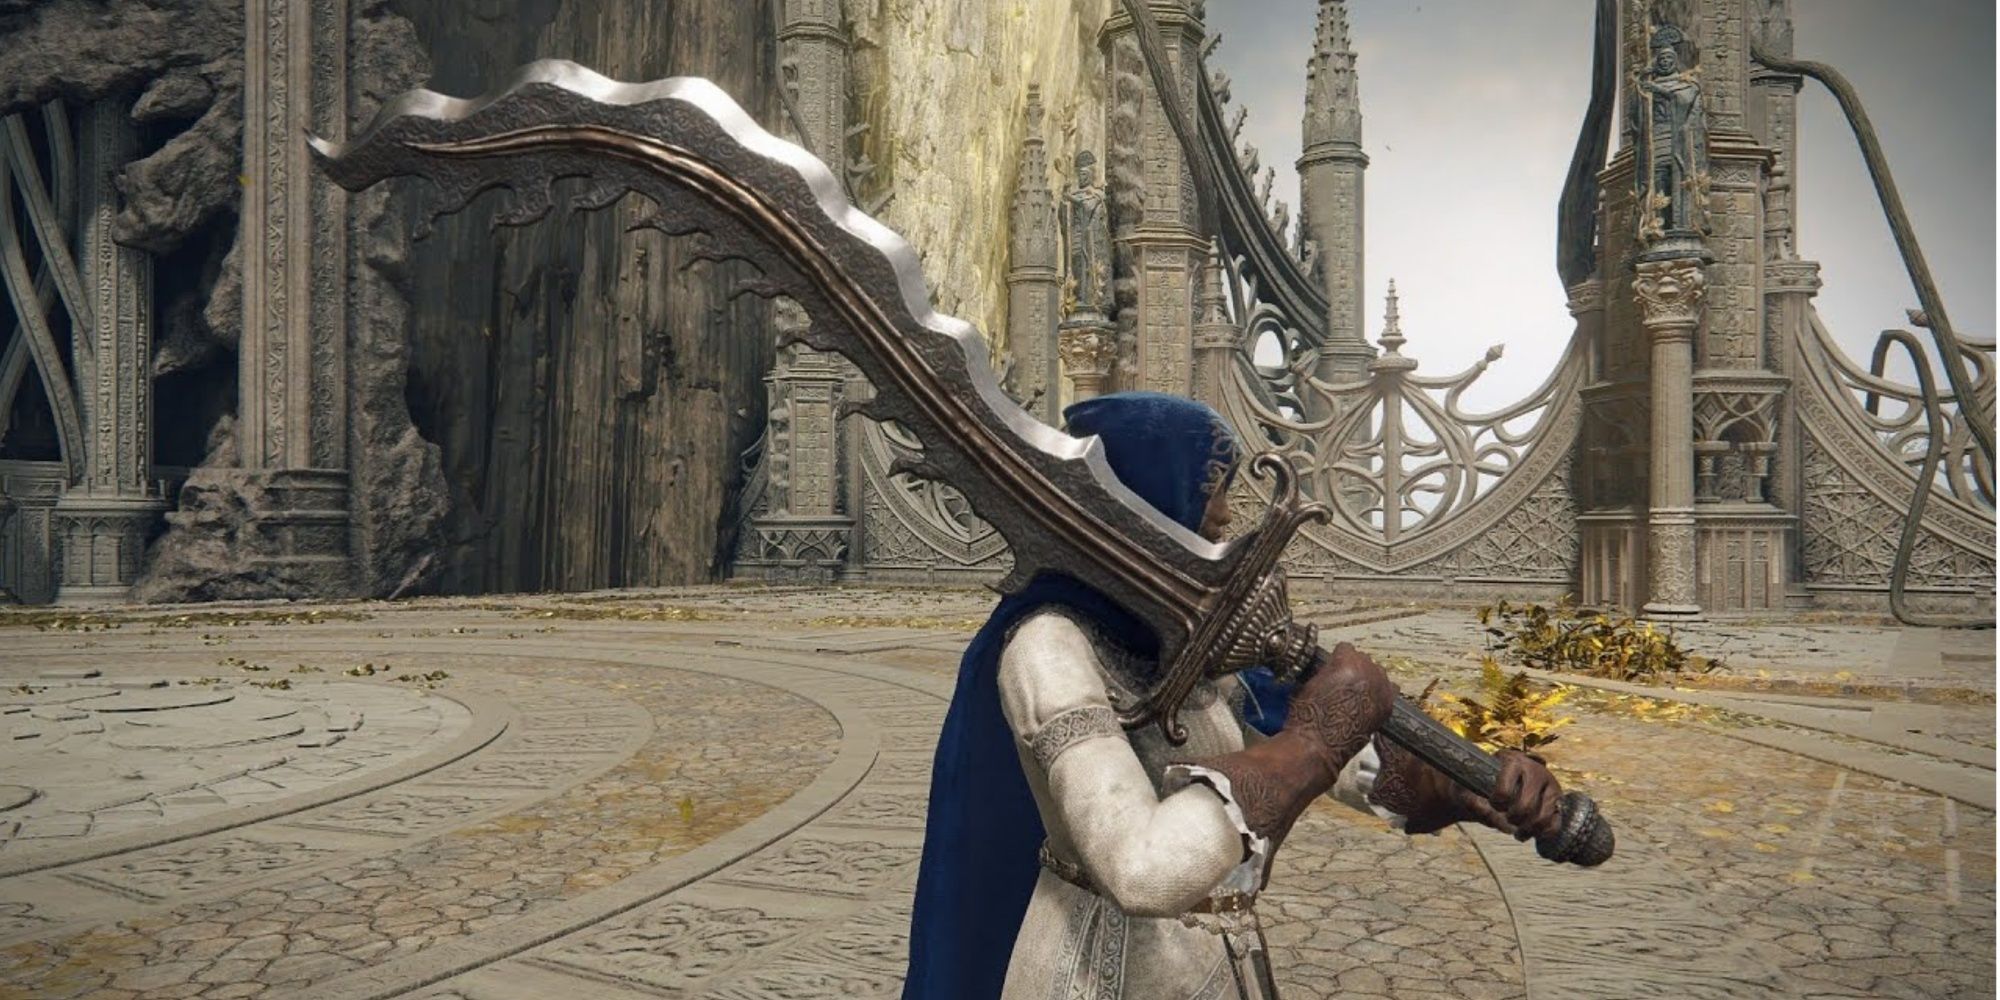 Monk's Flameblade wielded by a Tarnished in Elden Ring